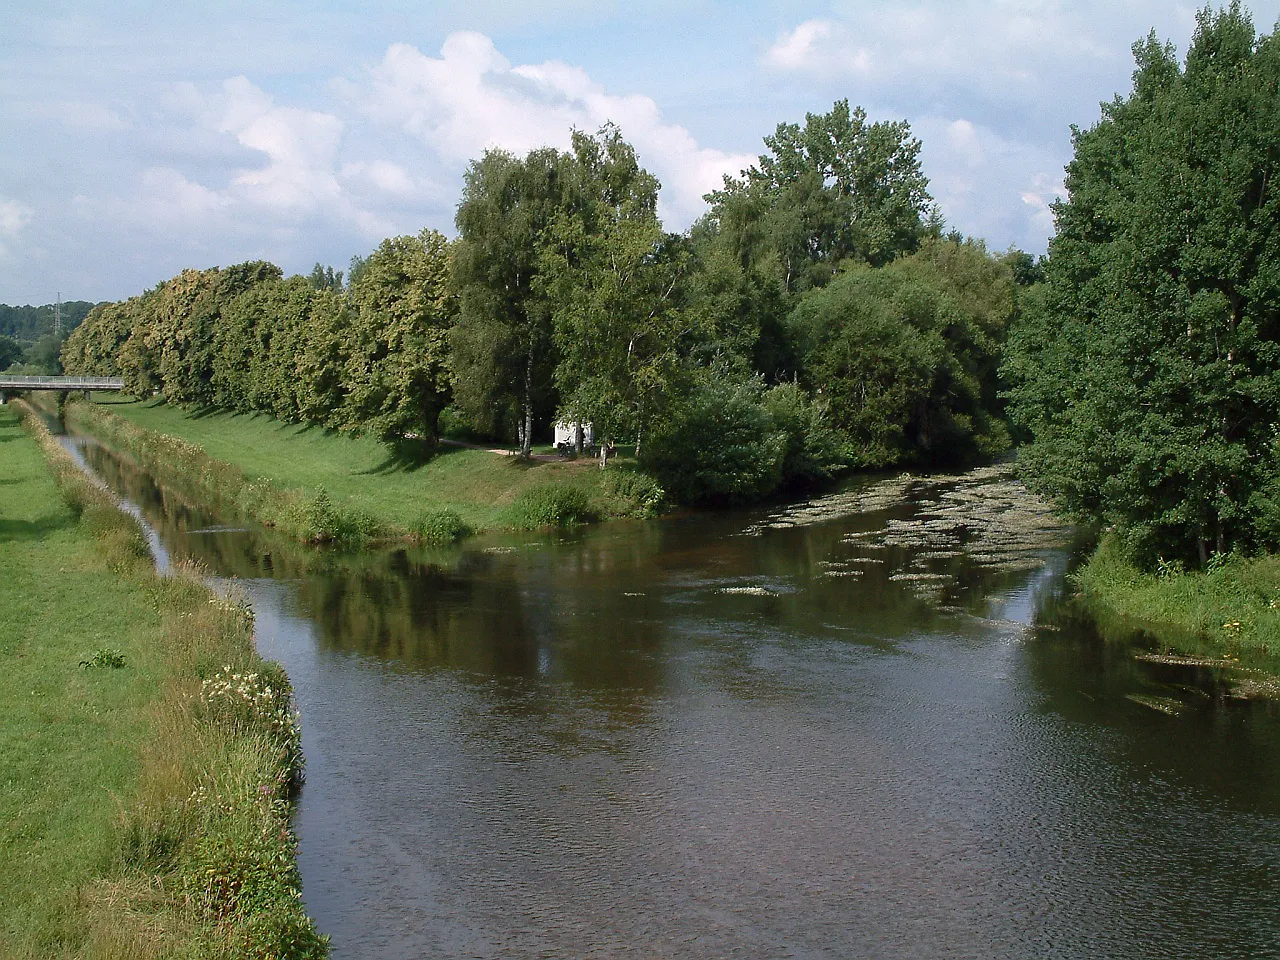 Photo showing: The place where Danube originates in Donaueschingen, Germany. The small river Breg and the stream Brigach unite into the river Danube. The German name of the place is "Donauzusammenfluss"